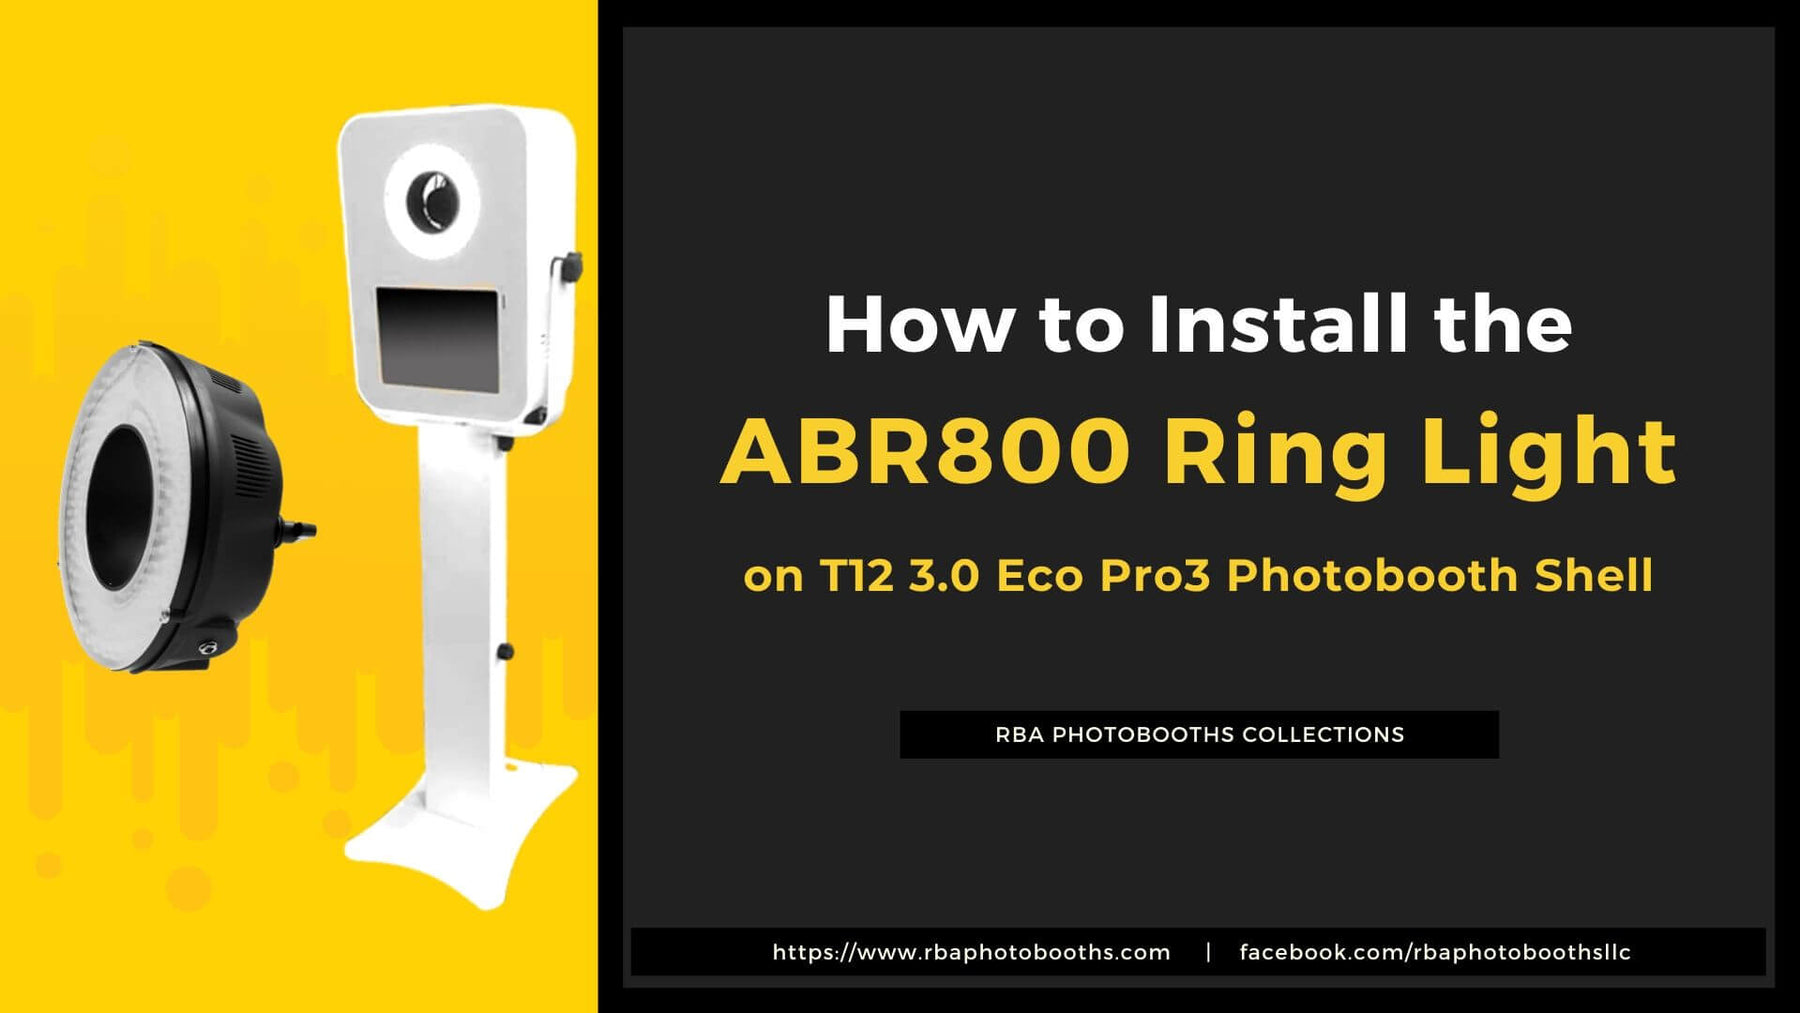 How To Install The ABR800 Ring Light On The T12 3.0 Eco Pro3 Photobooth Shell Enclosure